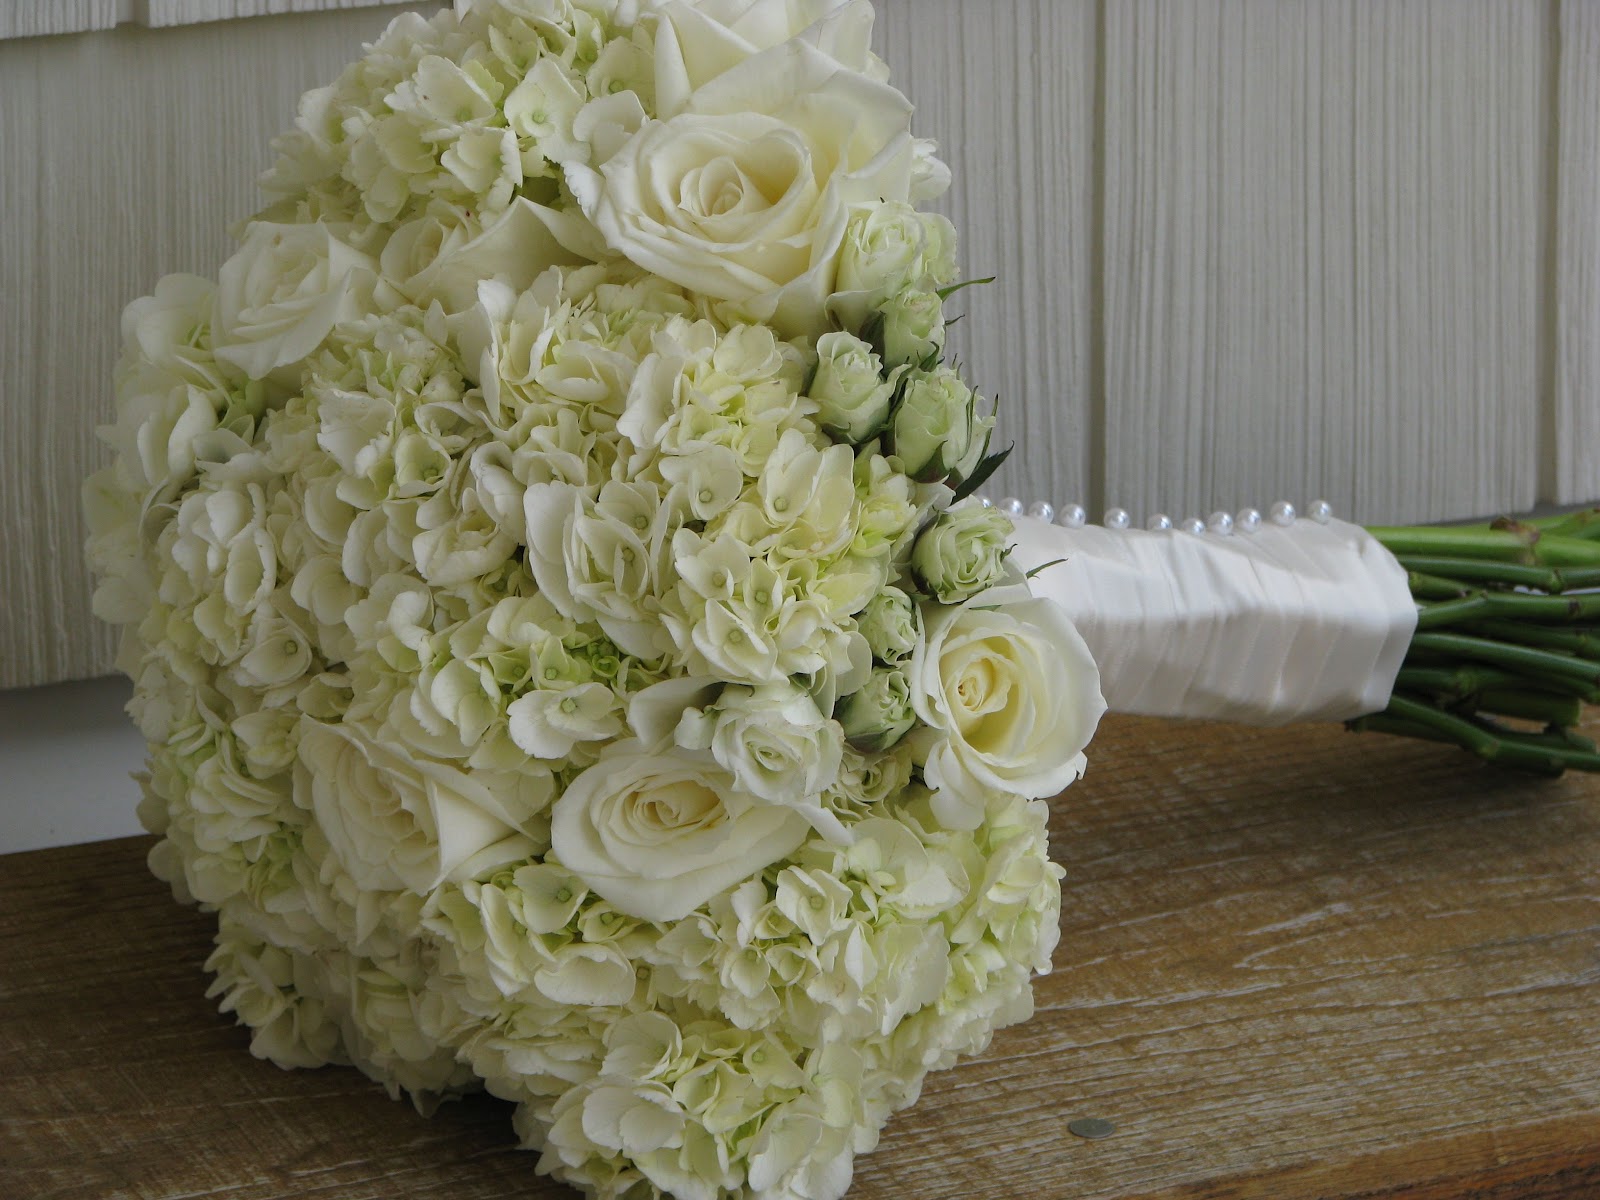 bouquet turned out Simple but Very Elegant! It had white hydrangea 